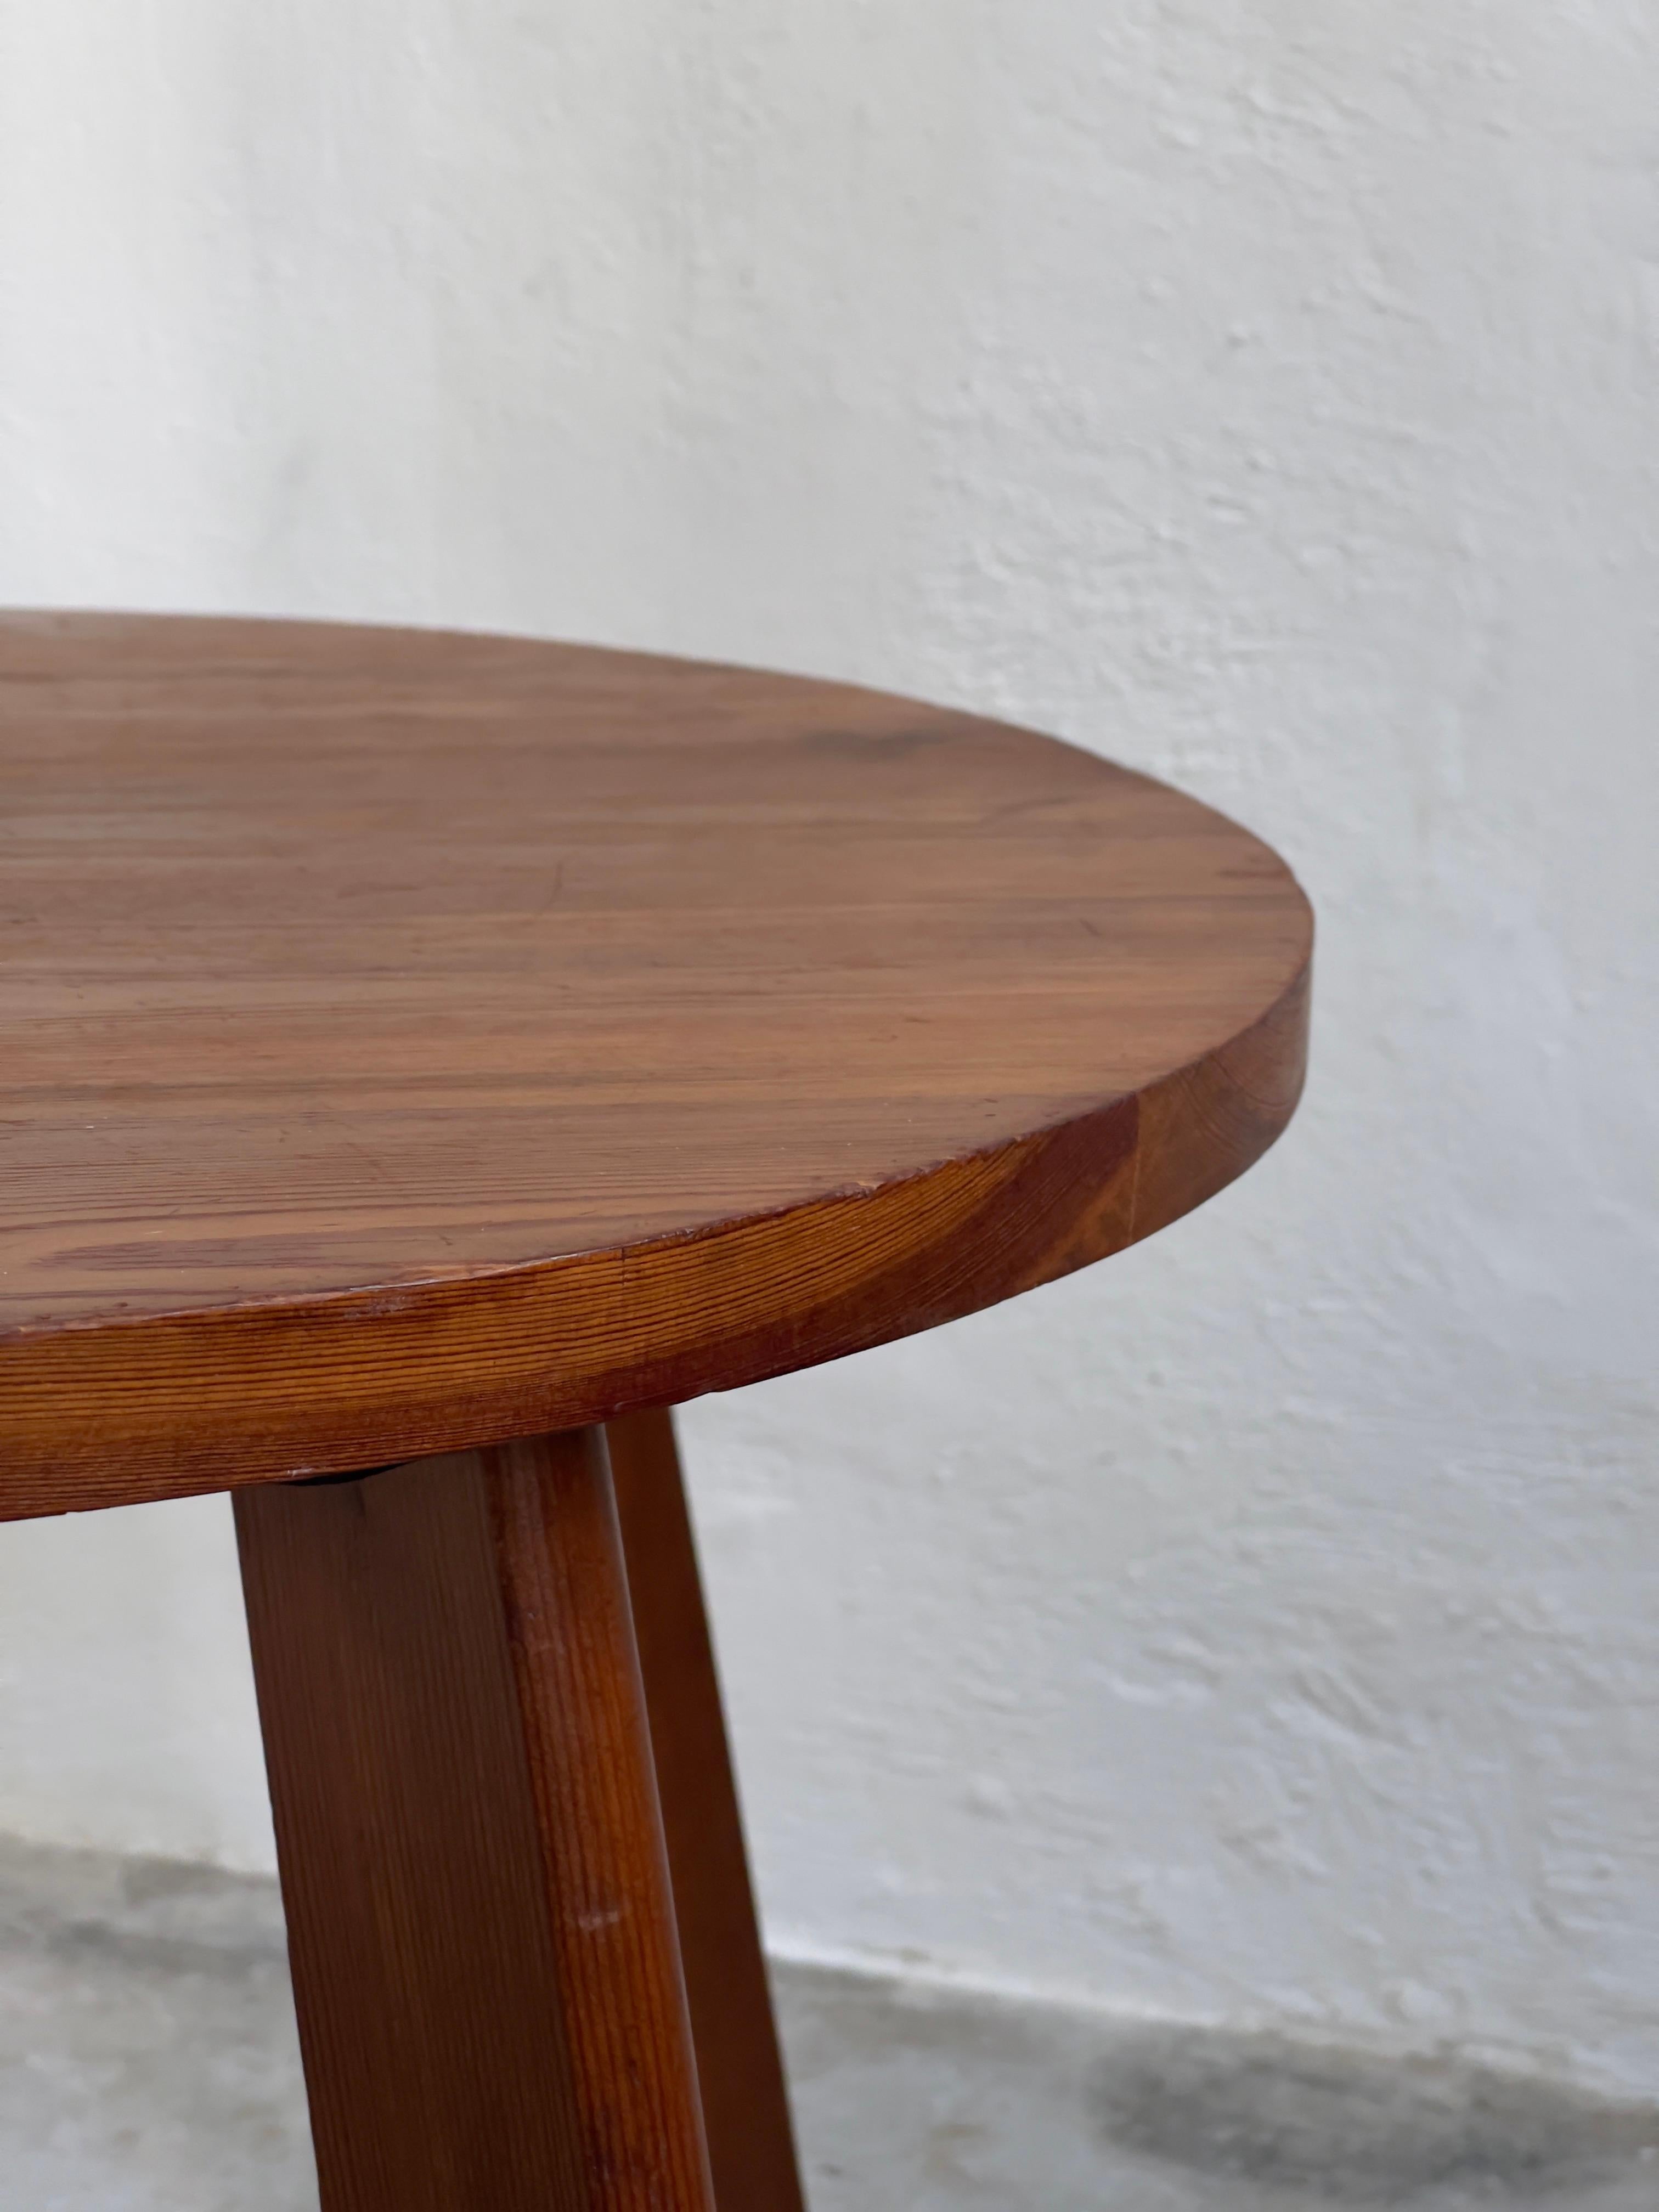 Scandinavian Modern 1930s Round Coffee Table in Deep Patinated Solid Pine from Danish Cabinet Maker For Sale